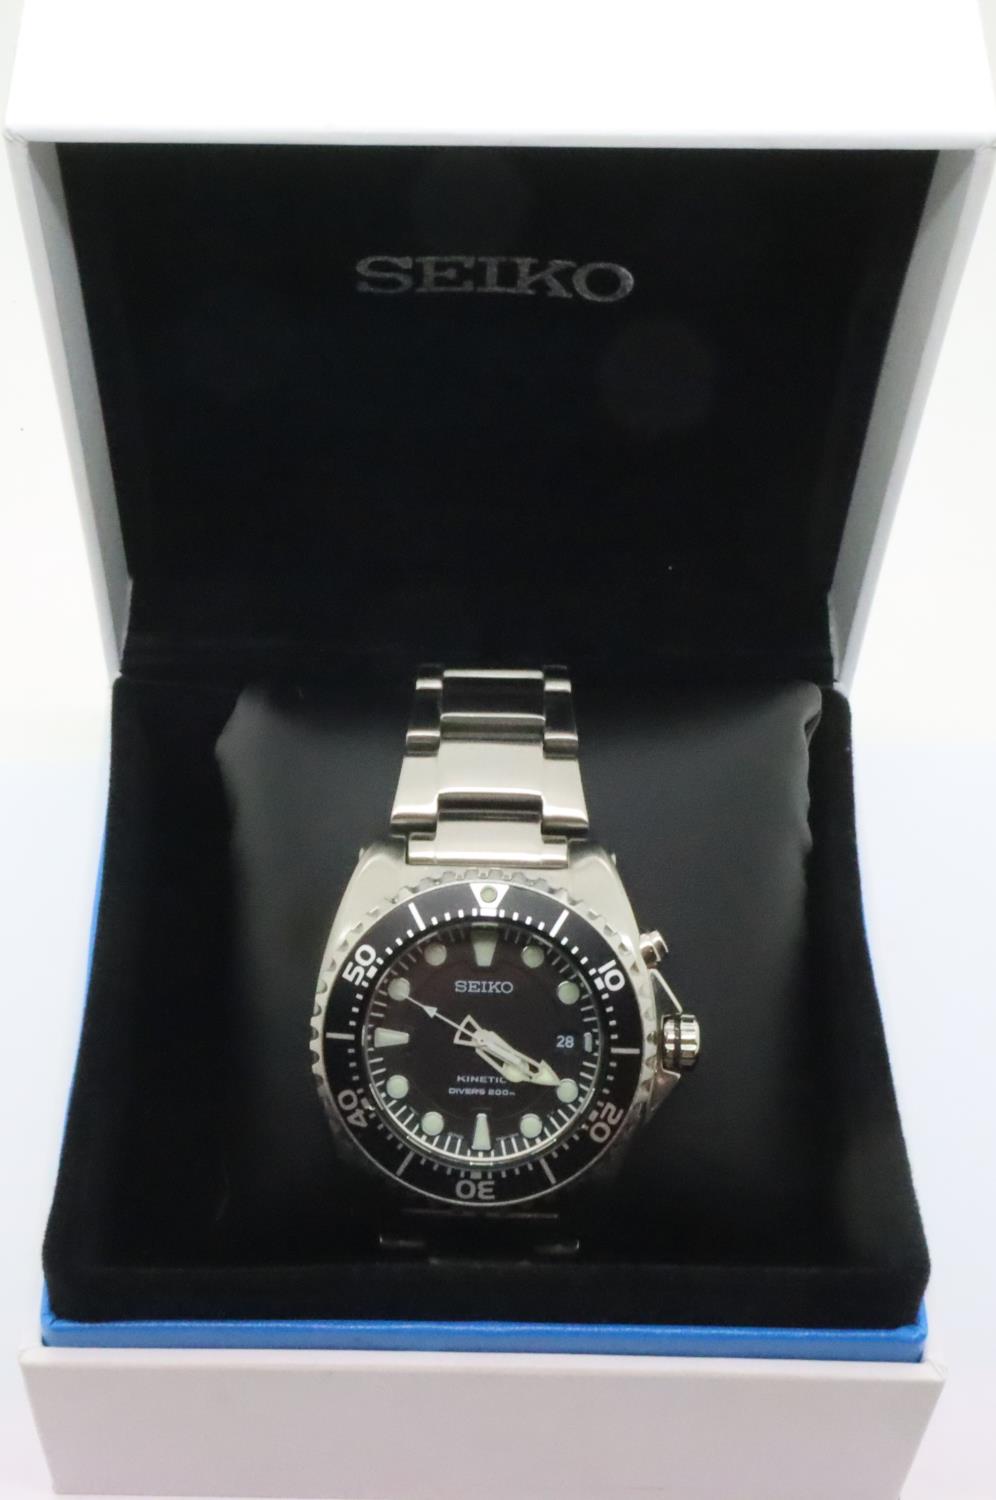 Seiko; gents kinetic 200m divers wristwatch, B.N.I.B stainless steel strap, black bezel and dial, in